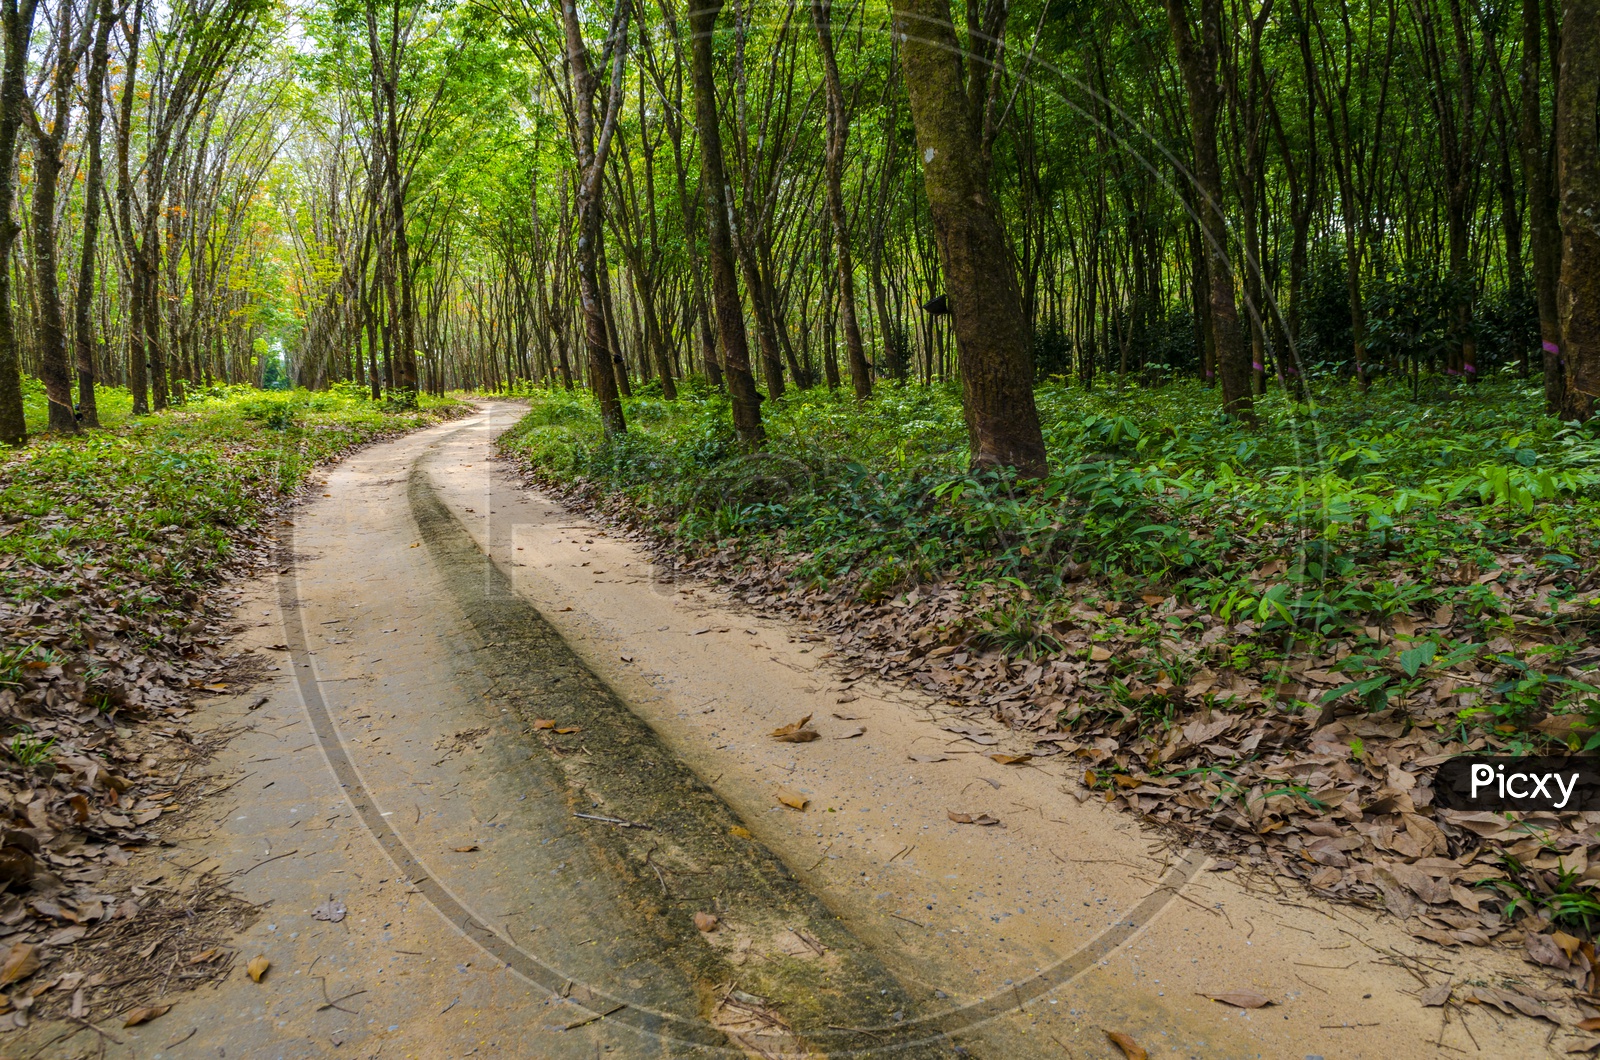 Pathways With Vehicle Tire Marks in Rubber Plantations With Rubber Trees On Both Sides